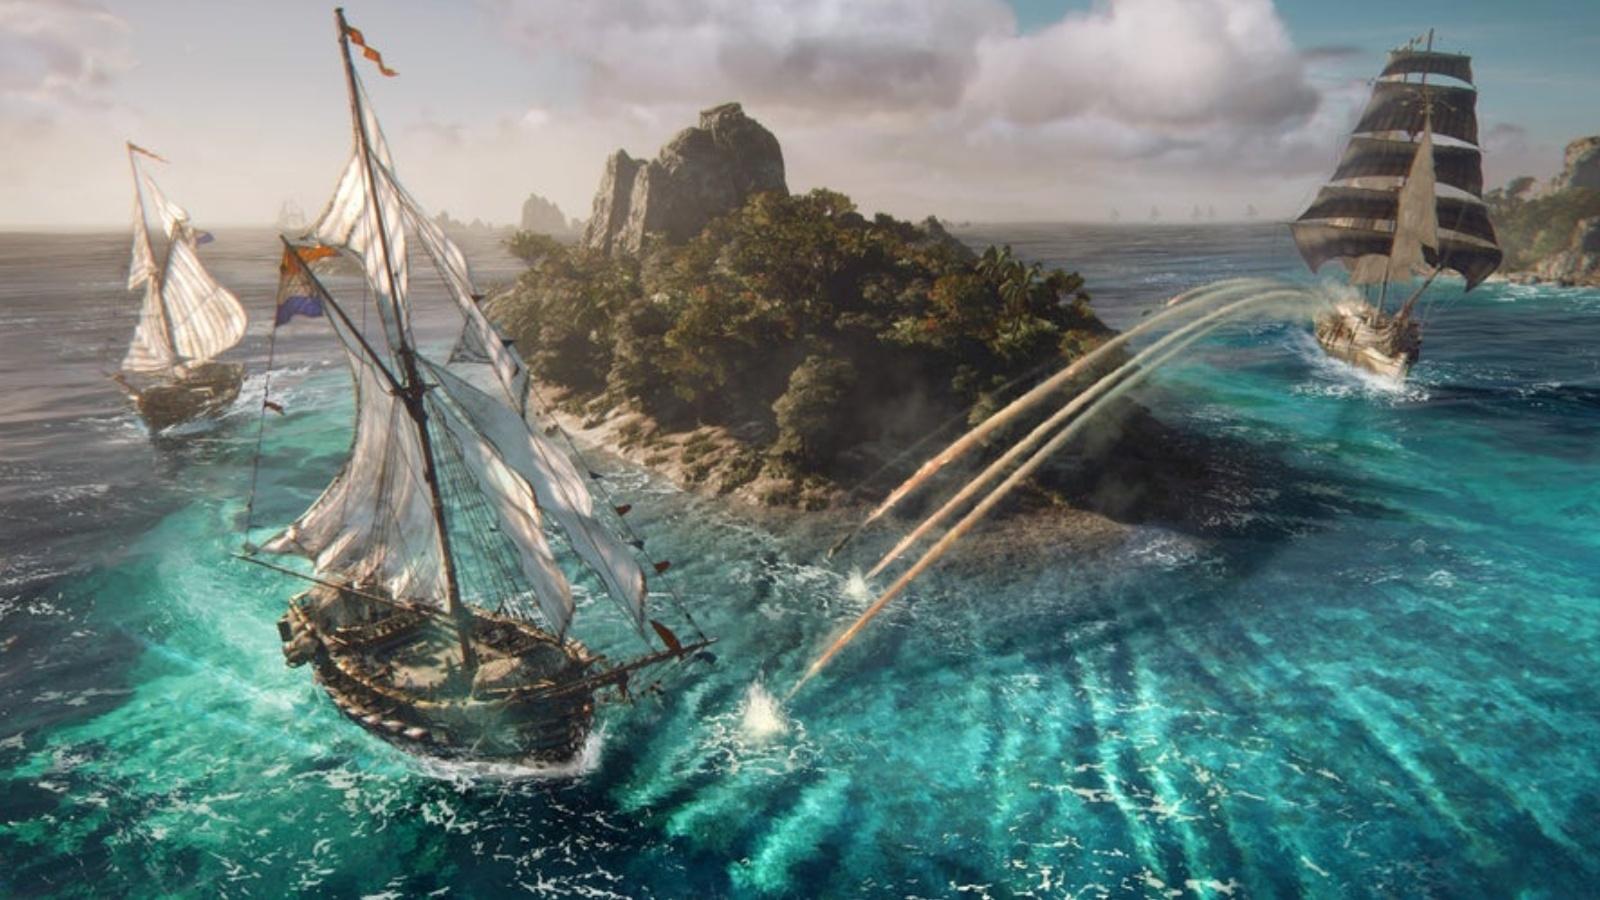 A screenshot from the game Skull and Bones